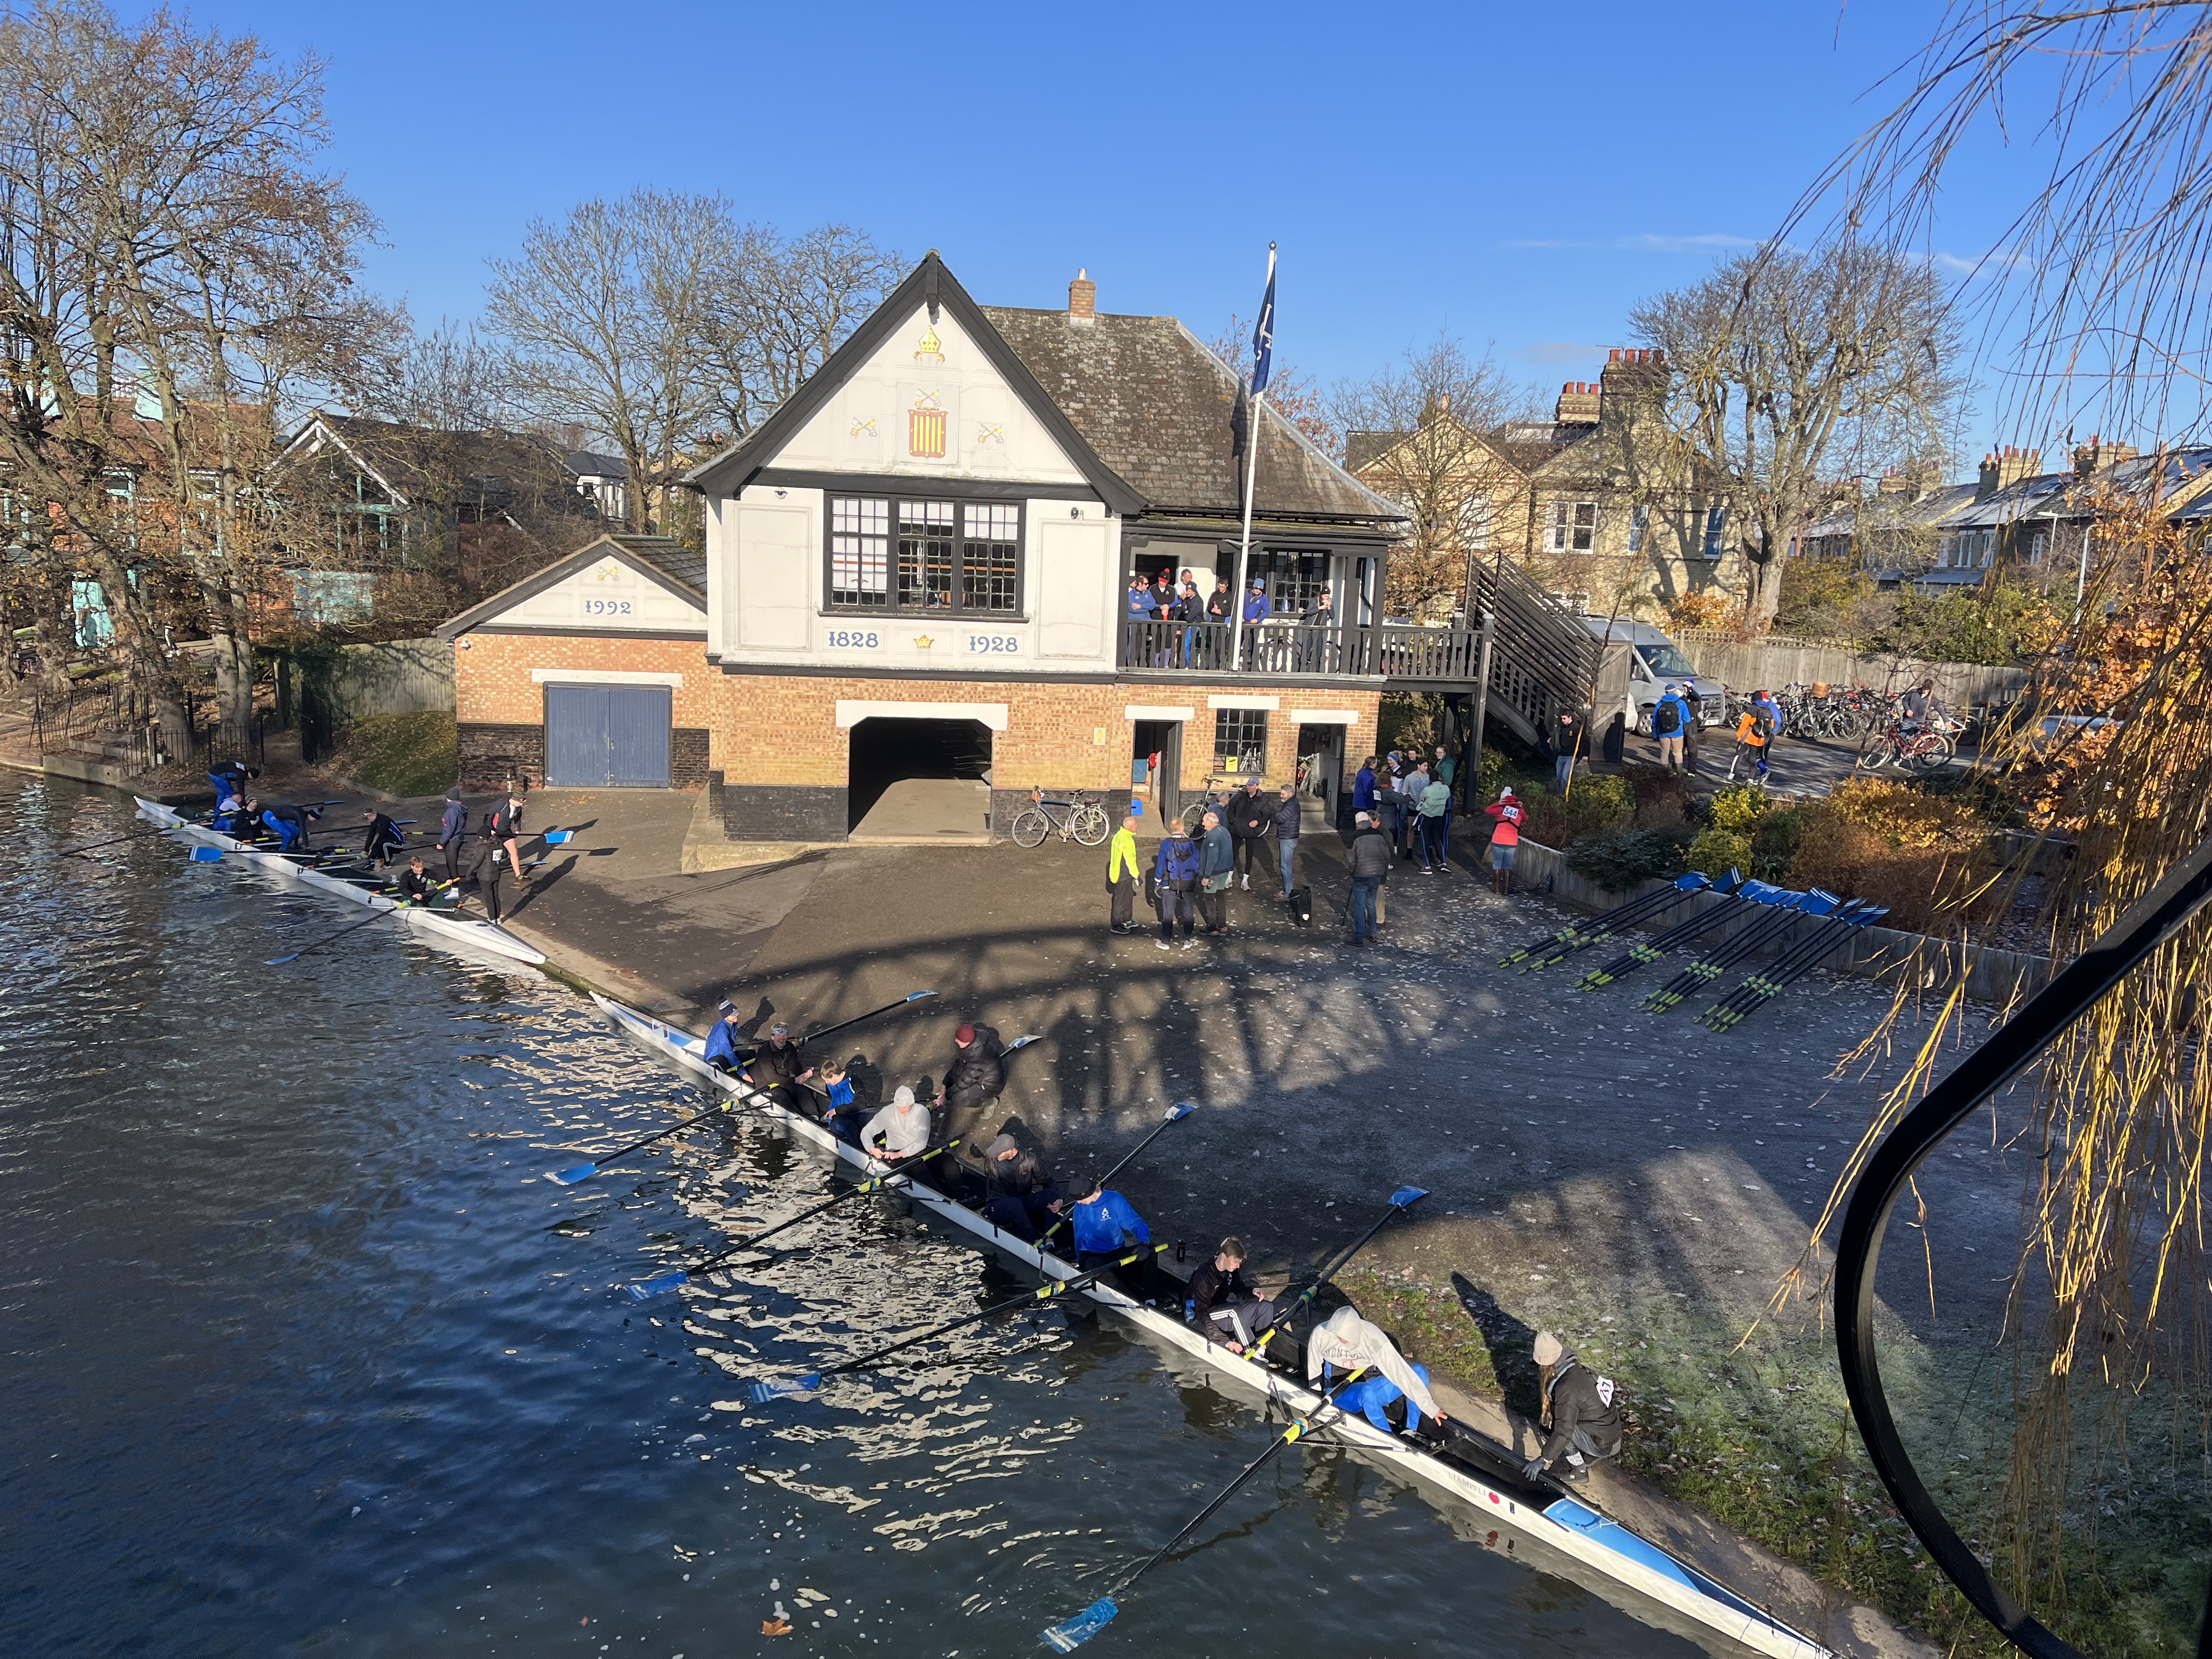 Student crews return to the boathouse post-race while alumni gather in preparation for their races